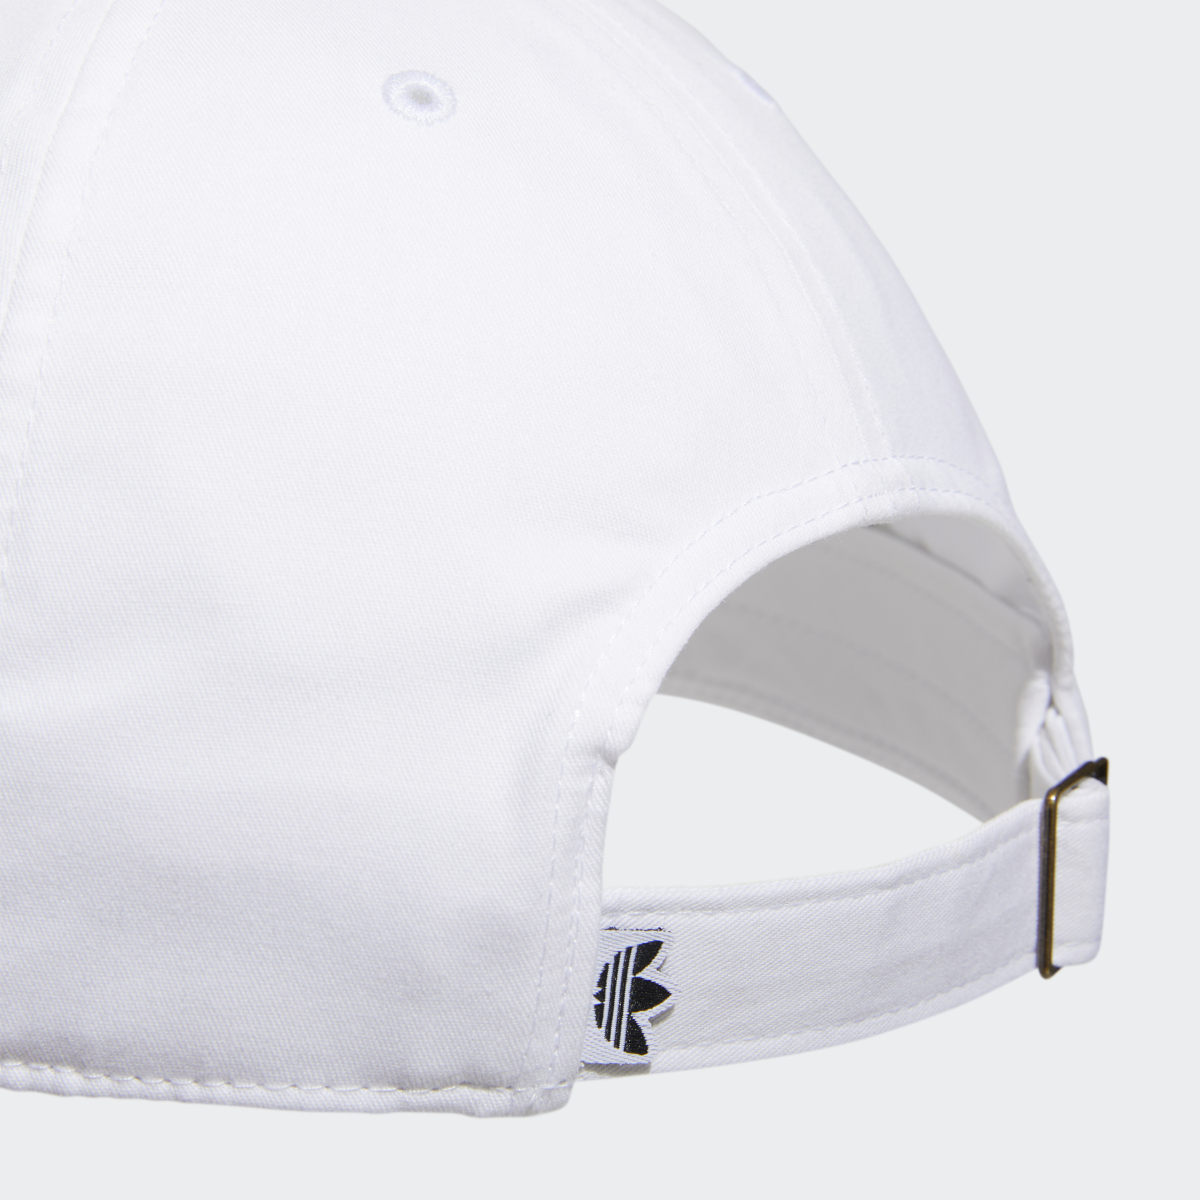 Adidas Relaxed Forum Hat. 7